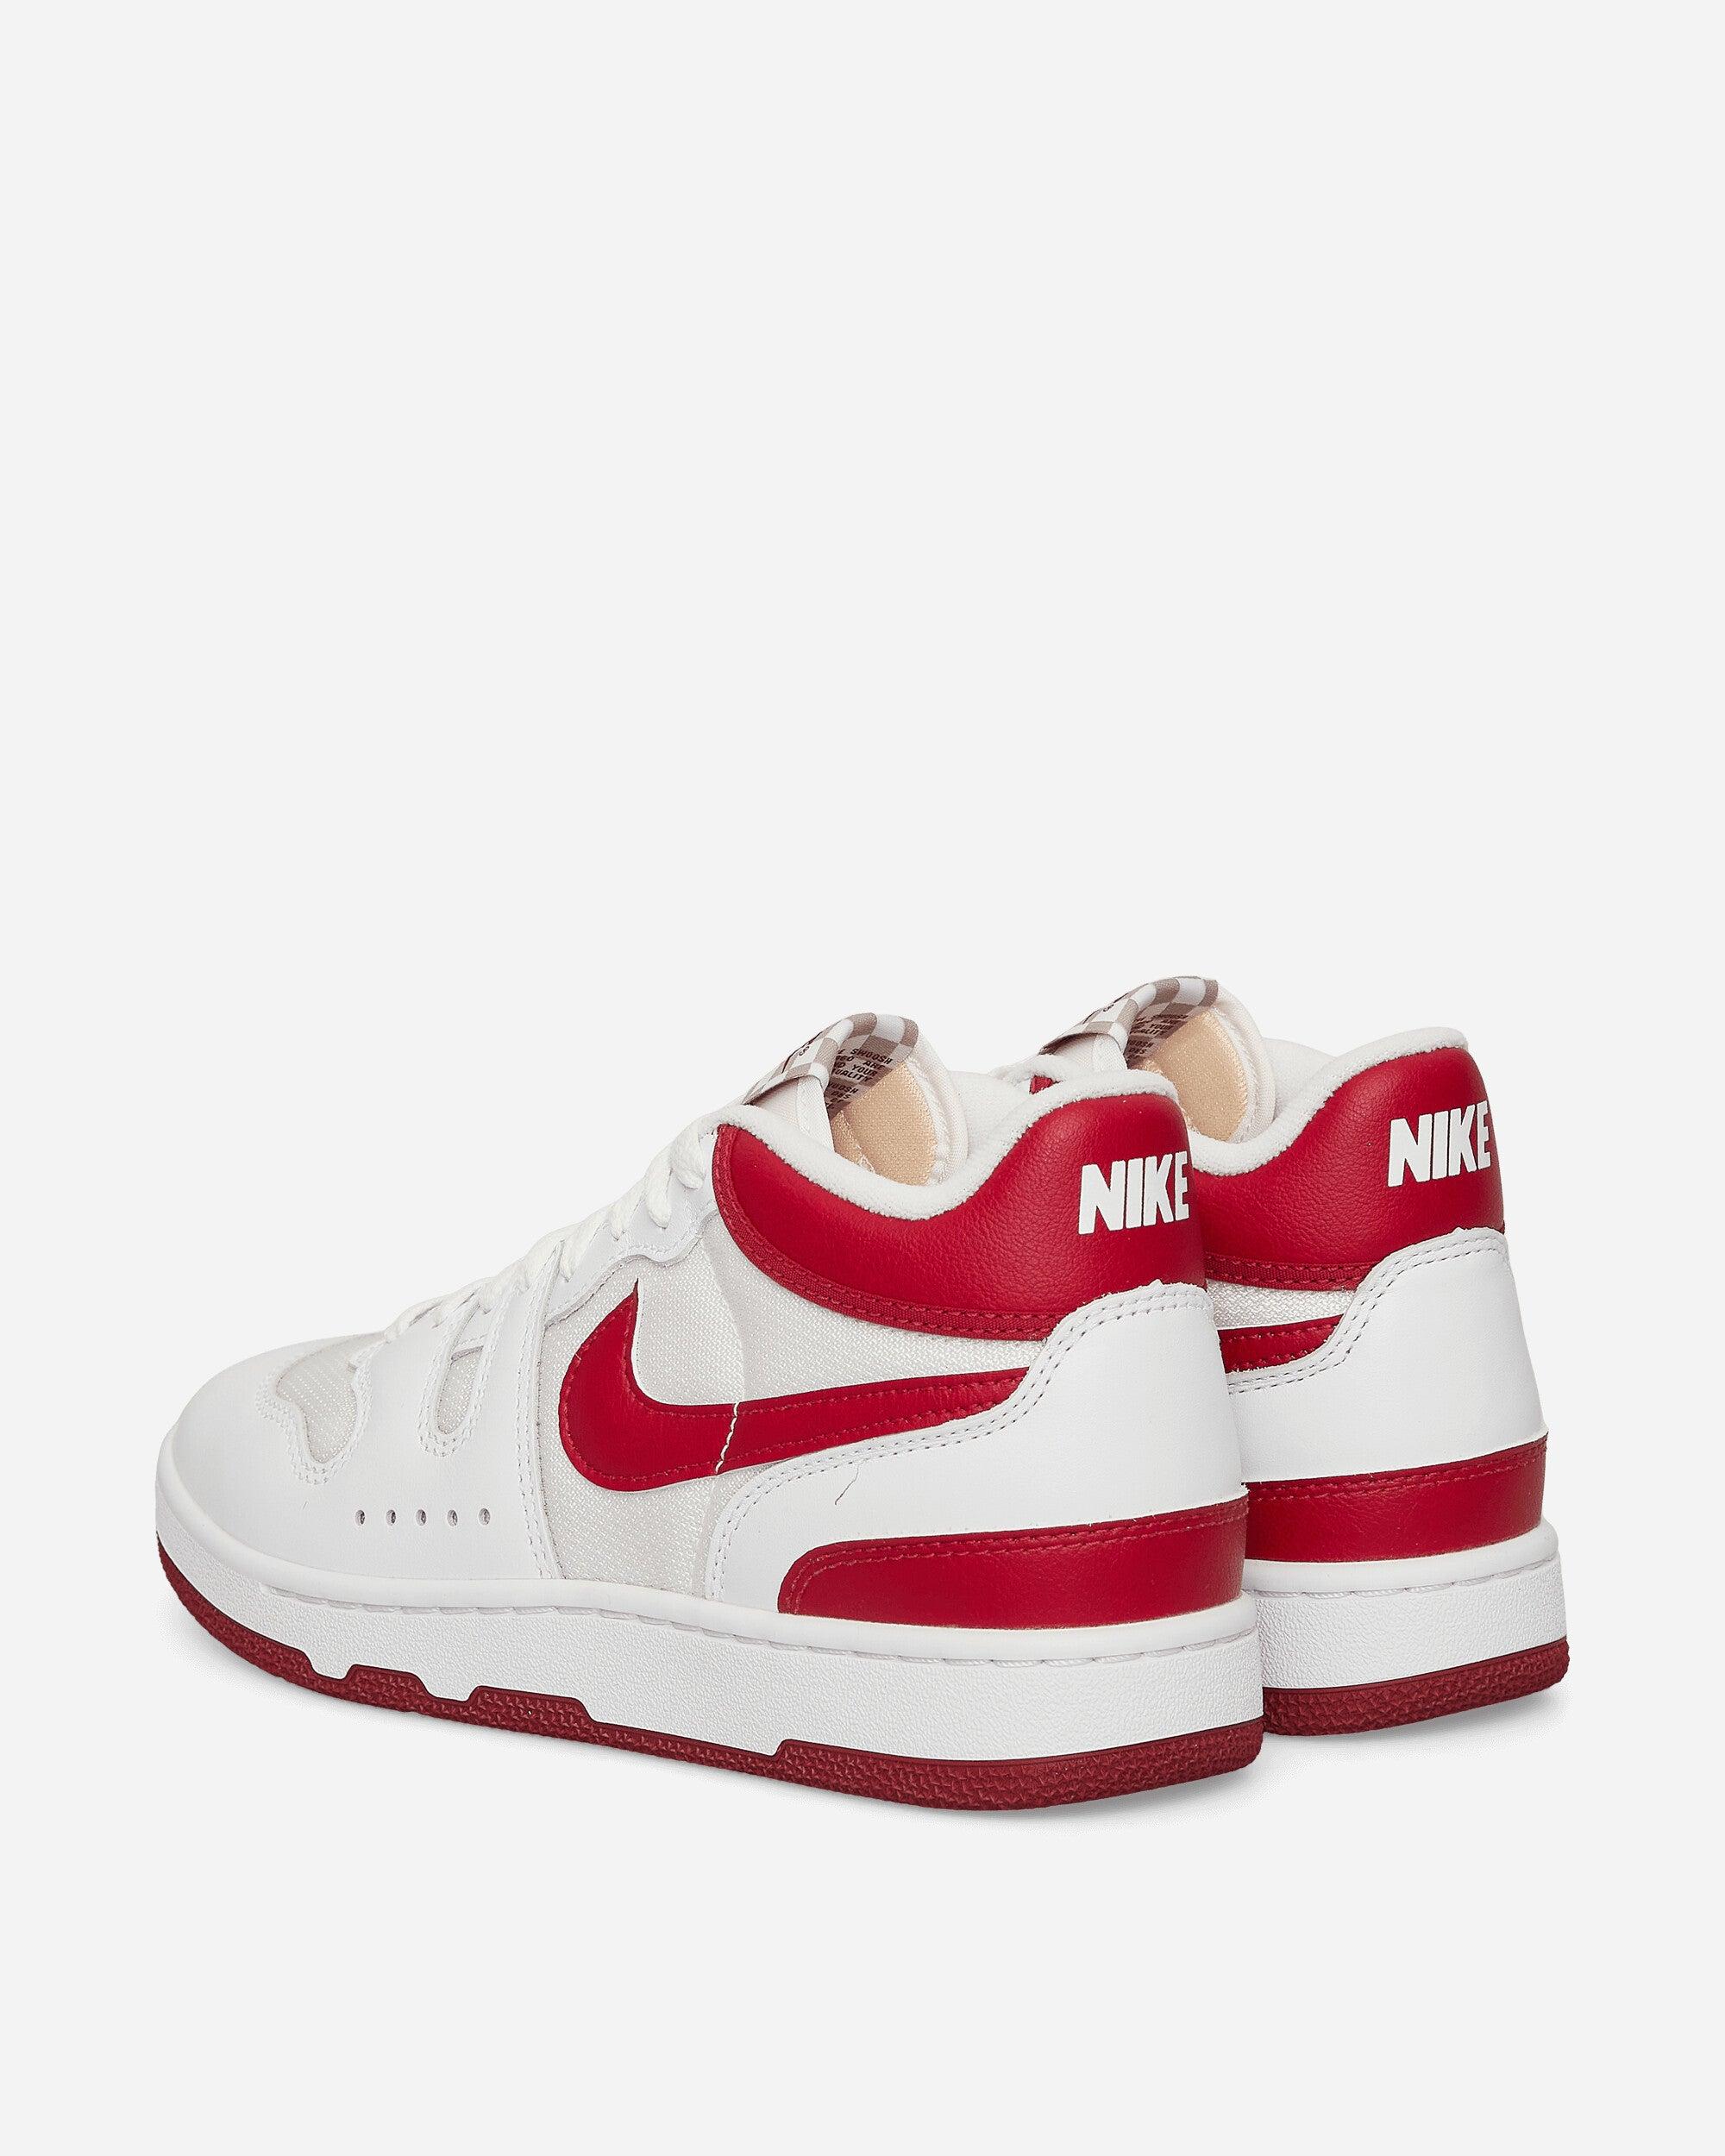 Nike Attack Qs Sp Sneakers White / Red Crush for Men | Lyst